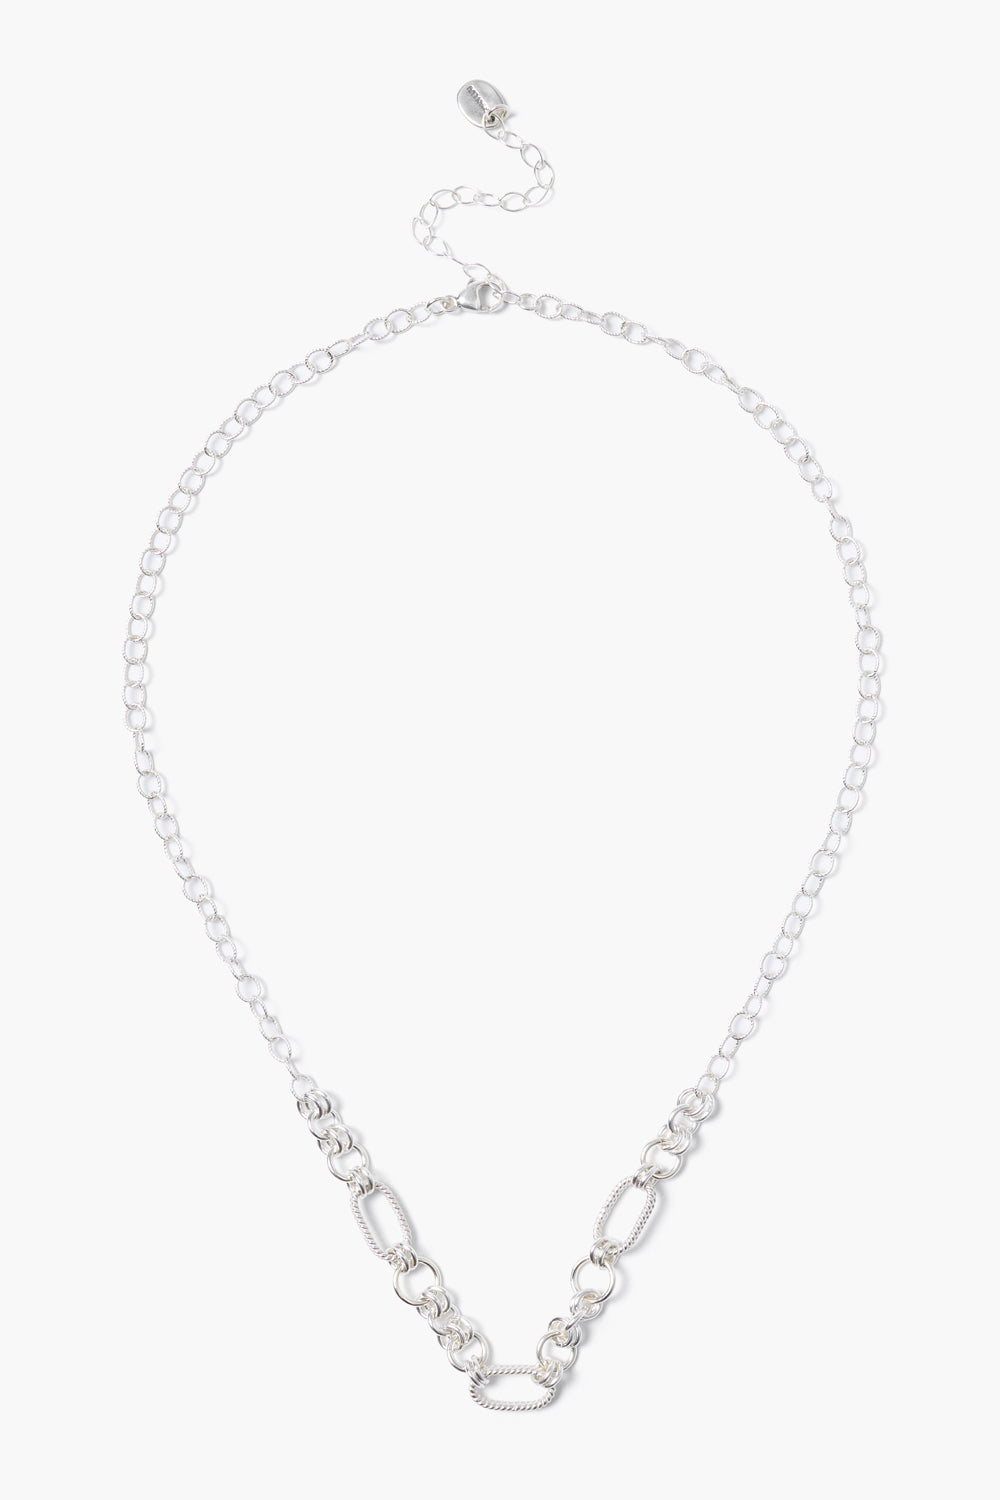 SILVER TEXTURED LINKS NECKLACE